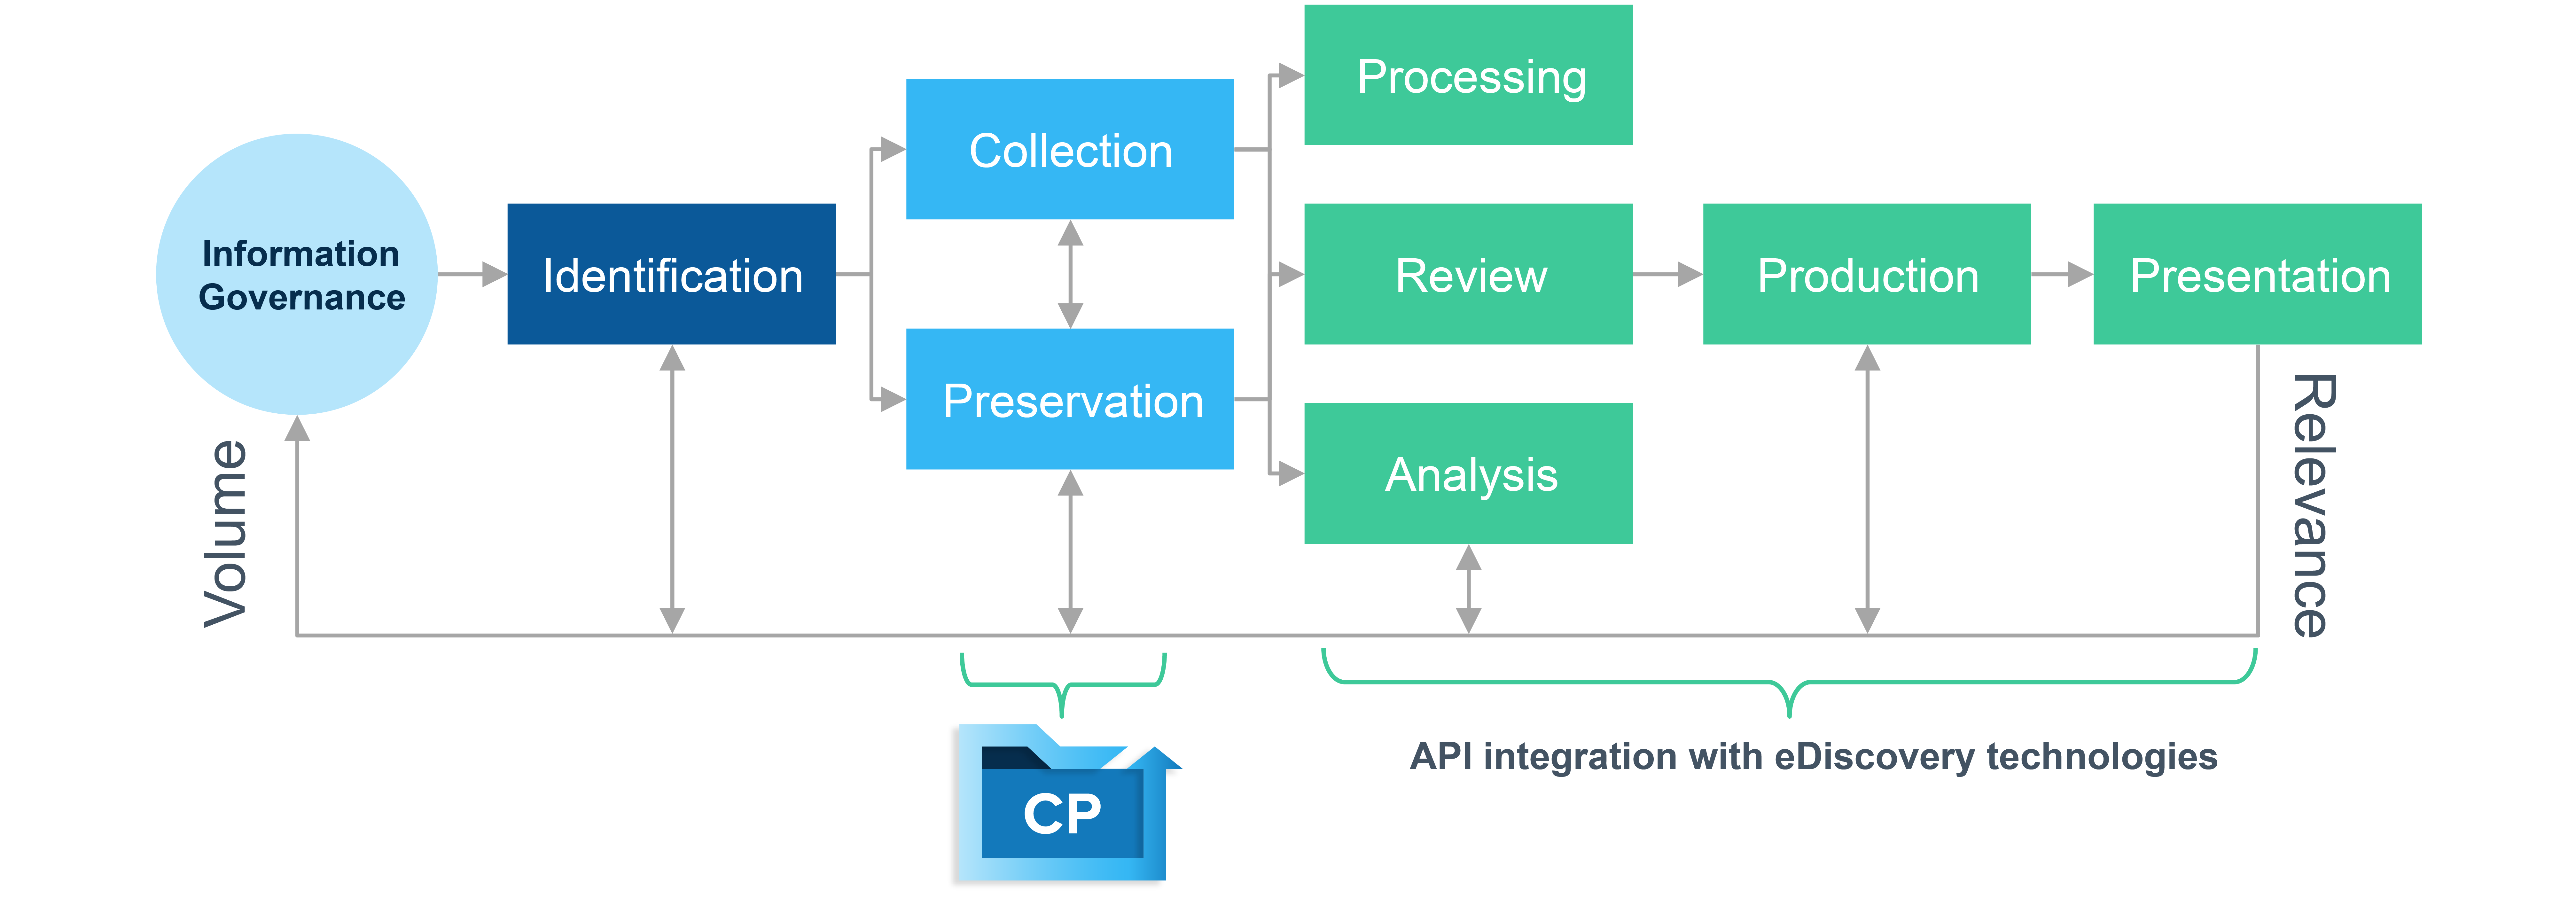 An image with a flowchart illustrates how CrashPlan fulfills the needs of the Collection and Preservation stages of the eDiscovery Reference Model.